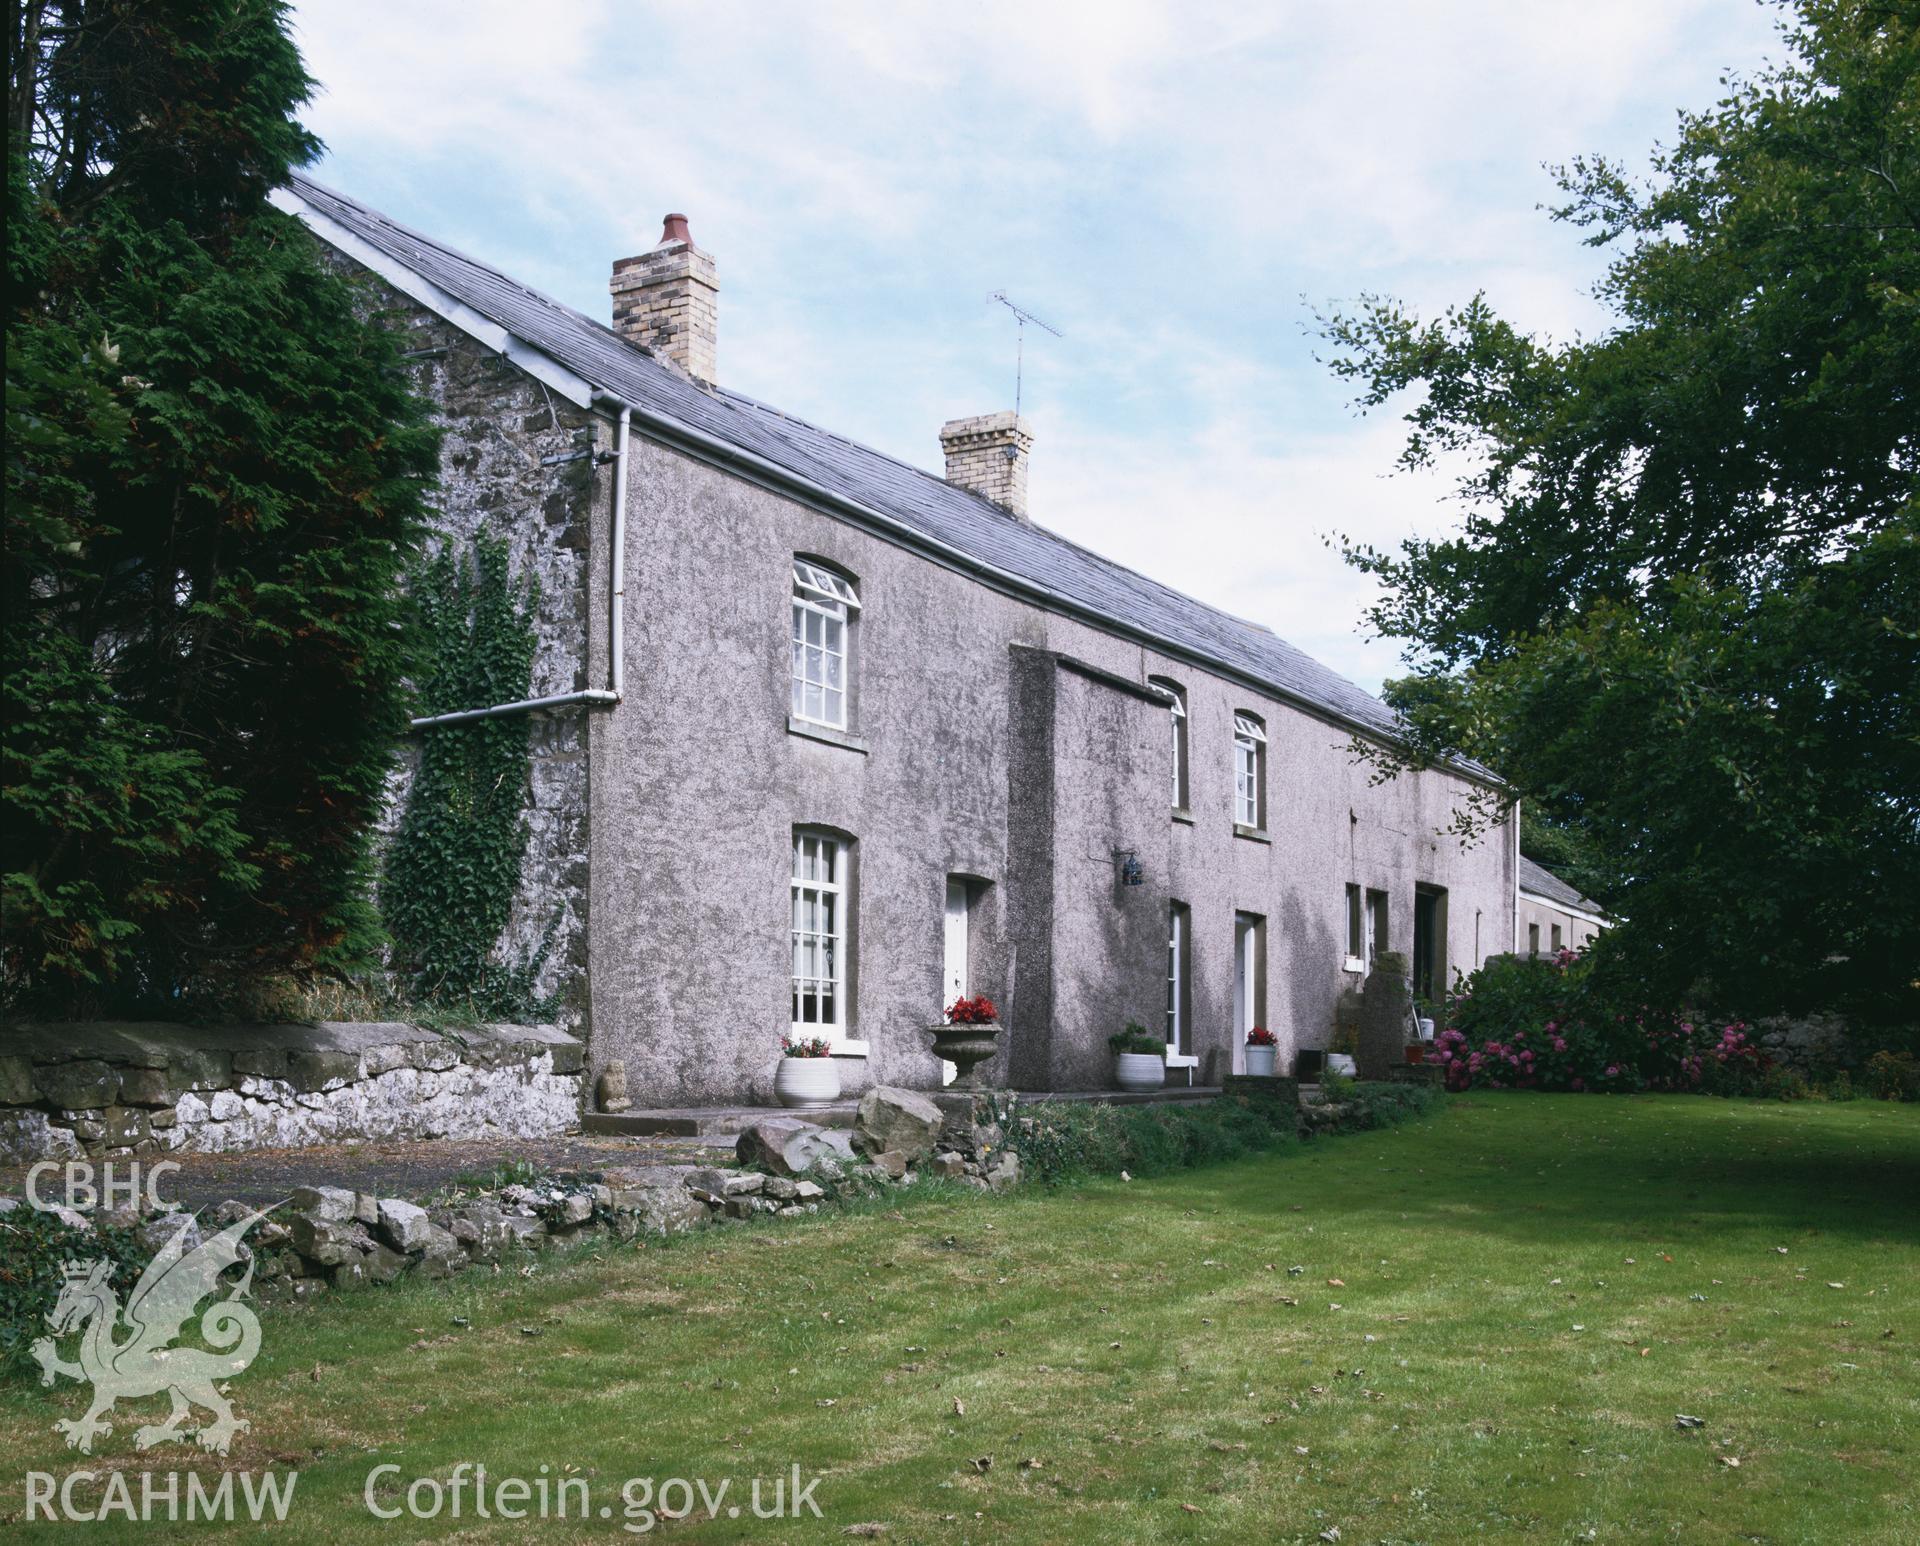 RCAHMW colour transparency of an exterior view of Ty Gwyn, Coity.